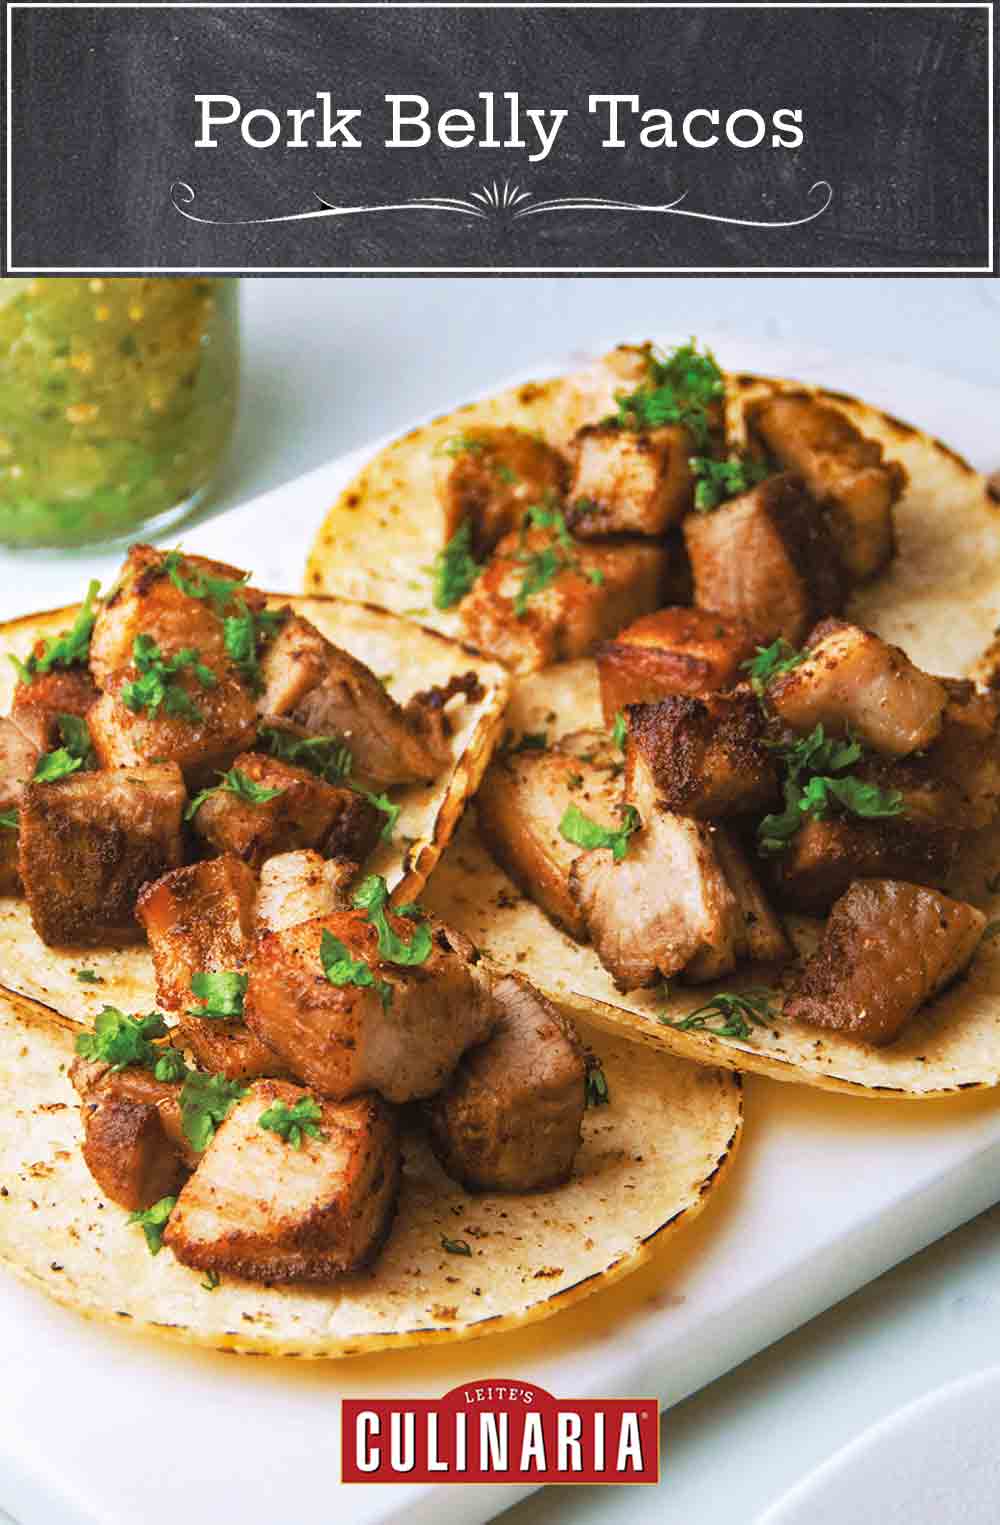 Four pork belly tacos garnished with cilantro and a jar of salsa in the background.